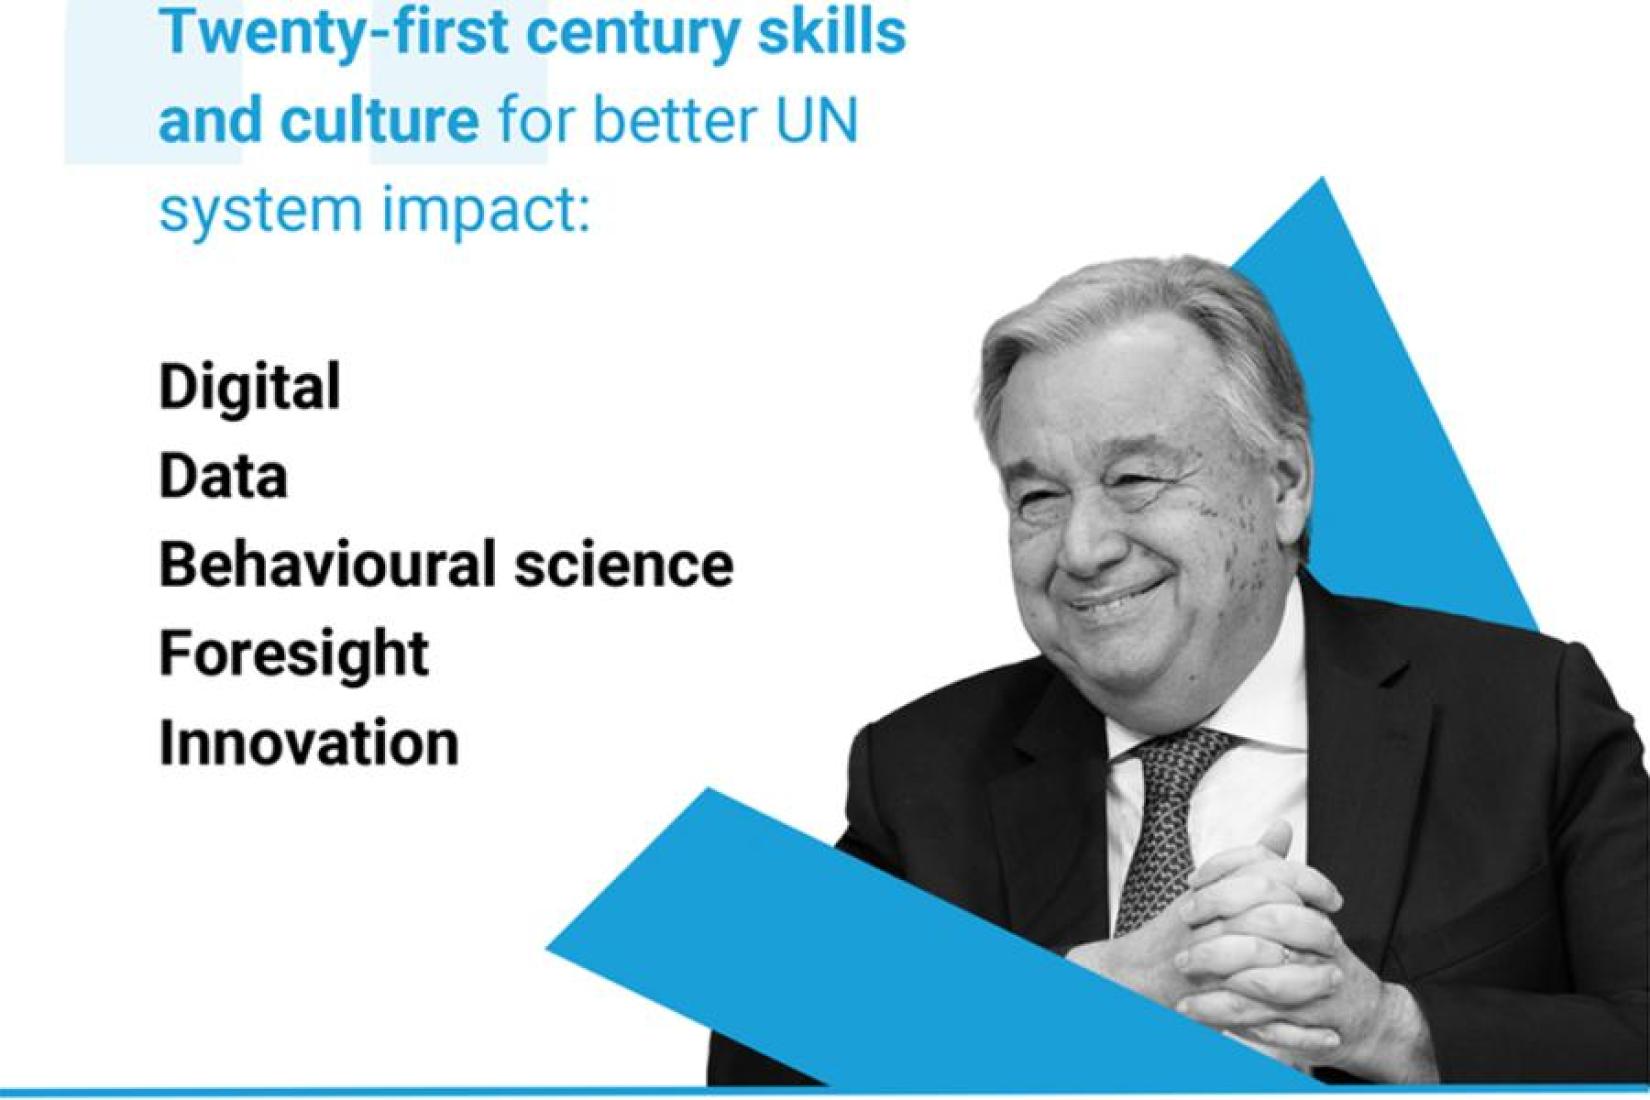 Photo of UN Secretary General Antonio Guterres and text Twenty-first century skills and culture for Better UN system impact: Digital Data Behavioural Science Foresight Innovation